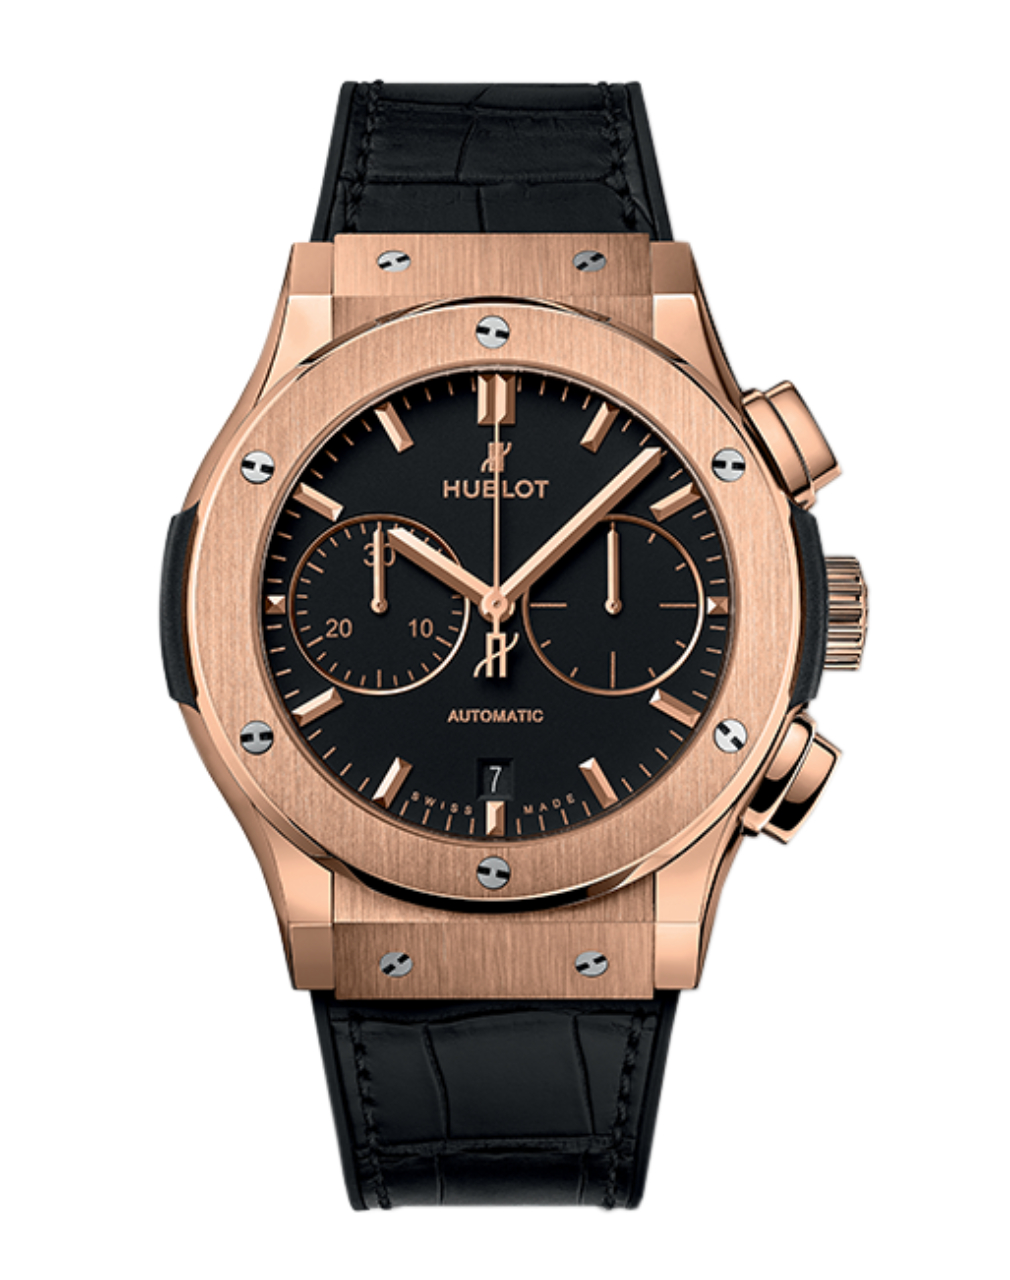 Classic Fusion Chronograph King Gold 45mm 521.OX.1181.LR